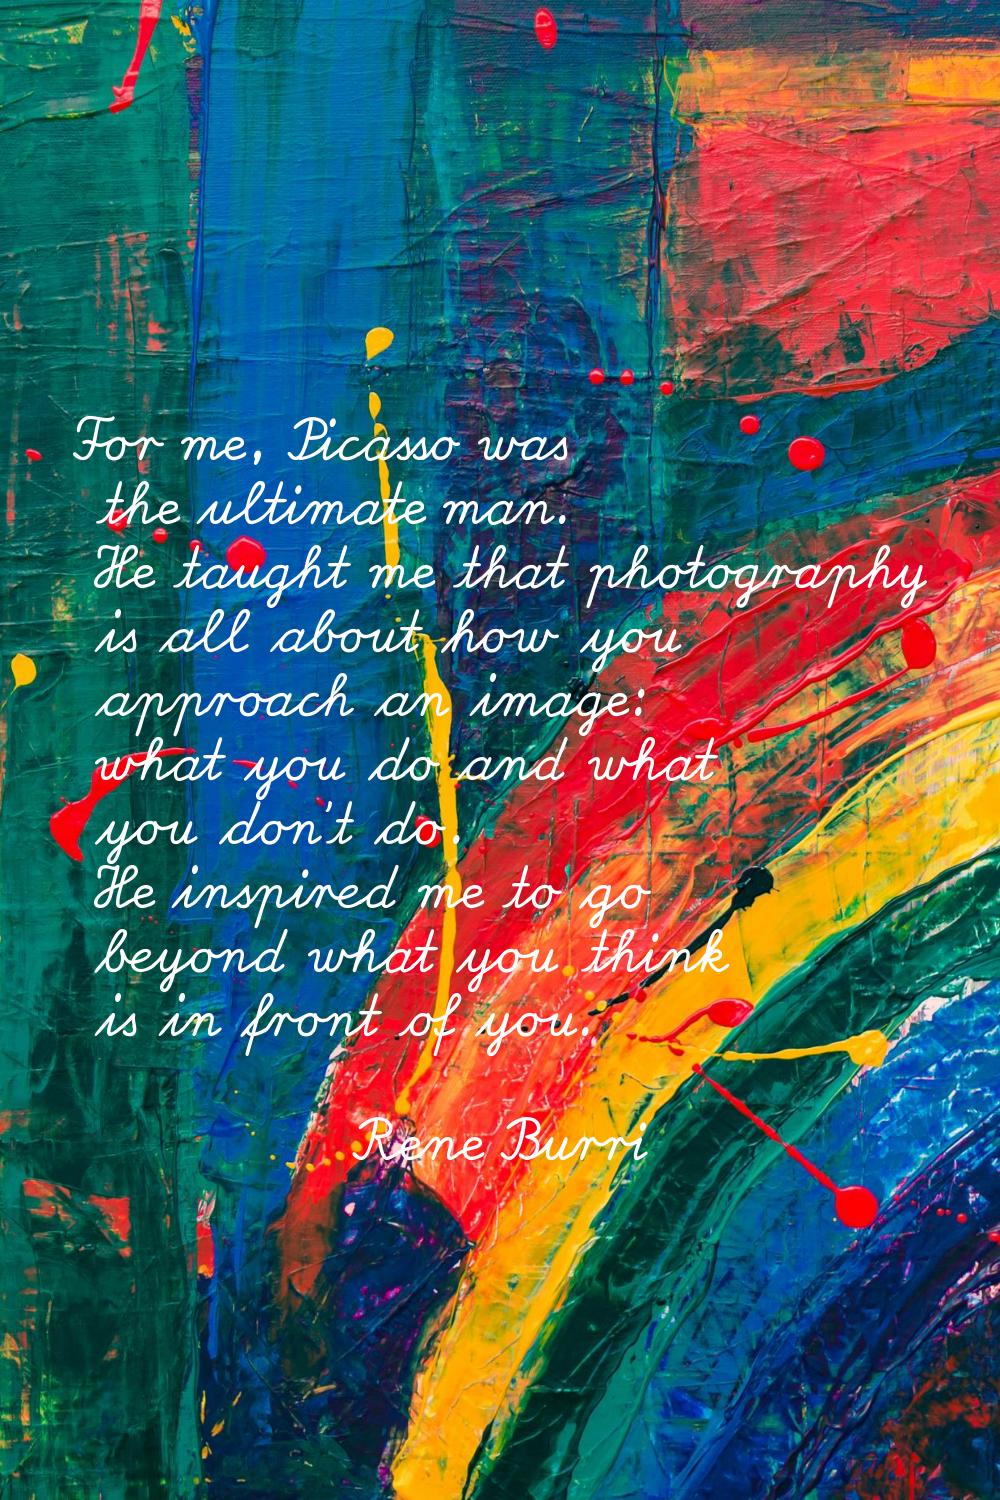 For me, Picasso was the ultimate man. He taught me that photography is all about how you approach a